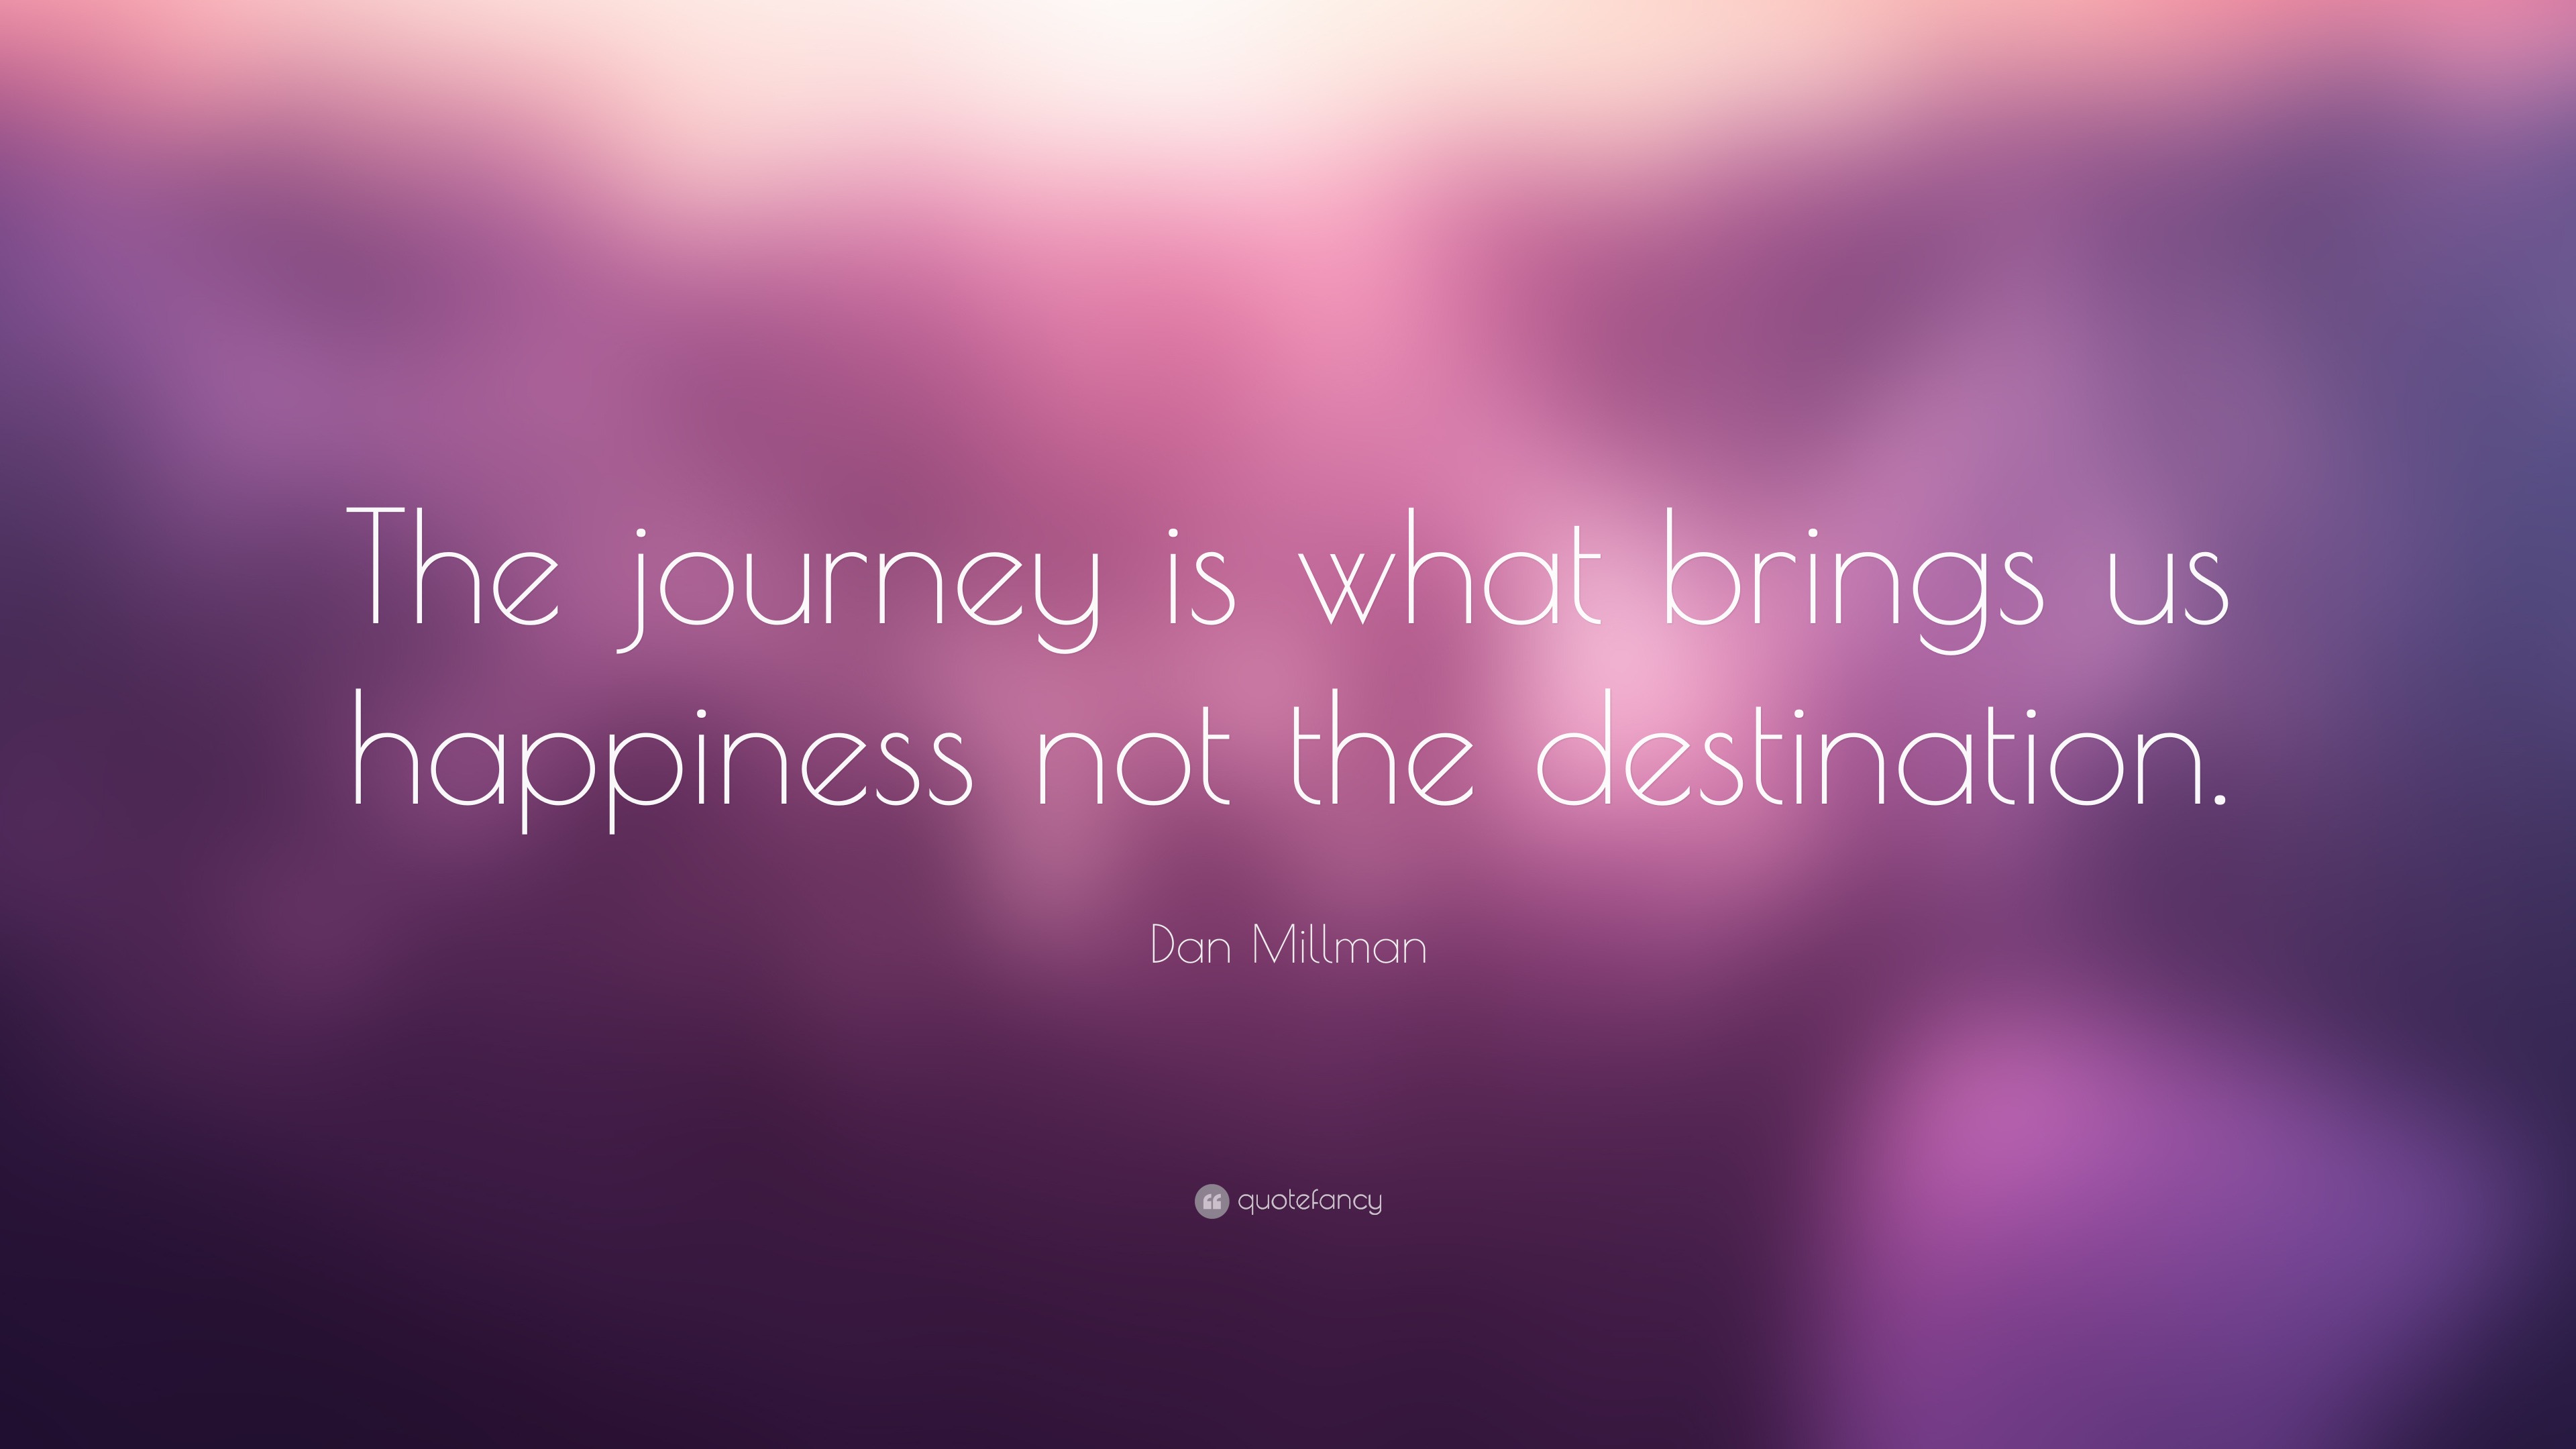 Dan Millman Quote The Journey Is What Brings Us Happiness Not The Destination